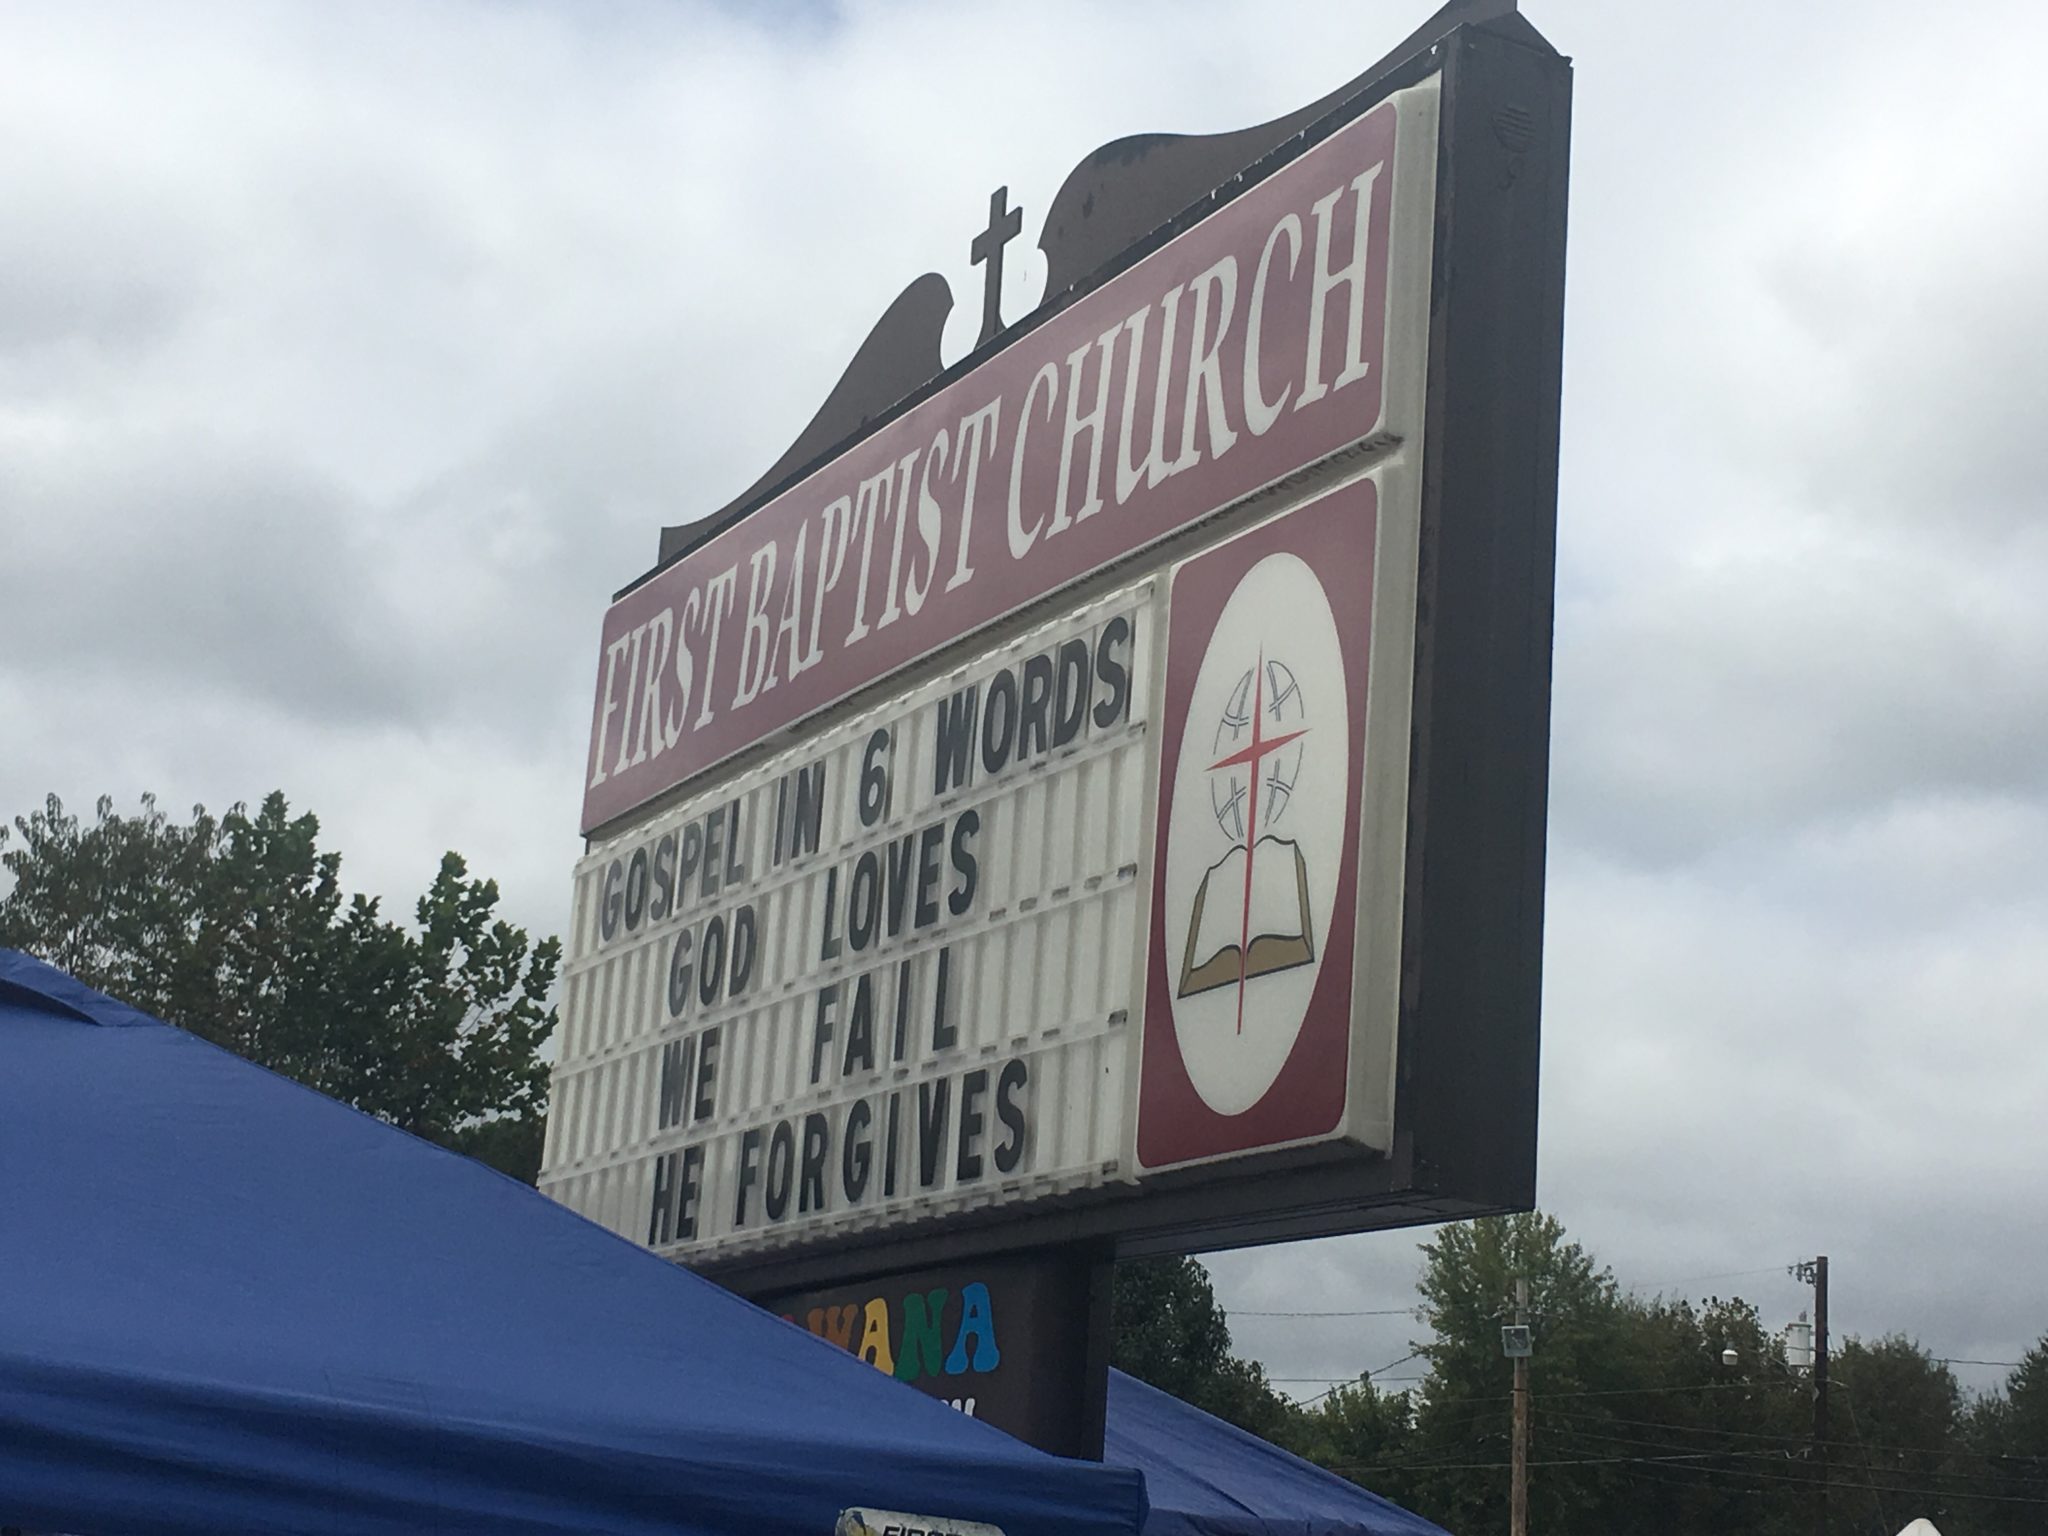 Gospel in 6 Words Church Sign - This church sign is from First Baptist Church of Barbourville, KY and shares what the gospel is in six words and is This Week's Church Sign Saturday. (God Loves, We Fail, He Forgives)